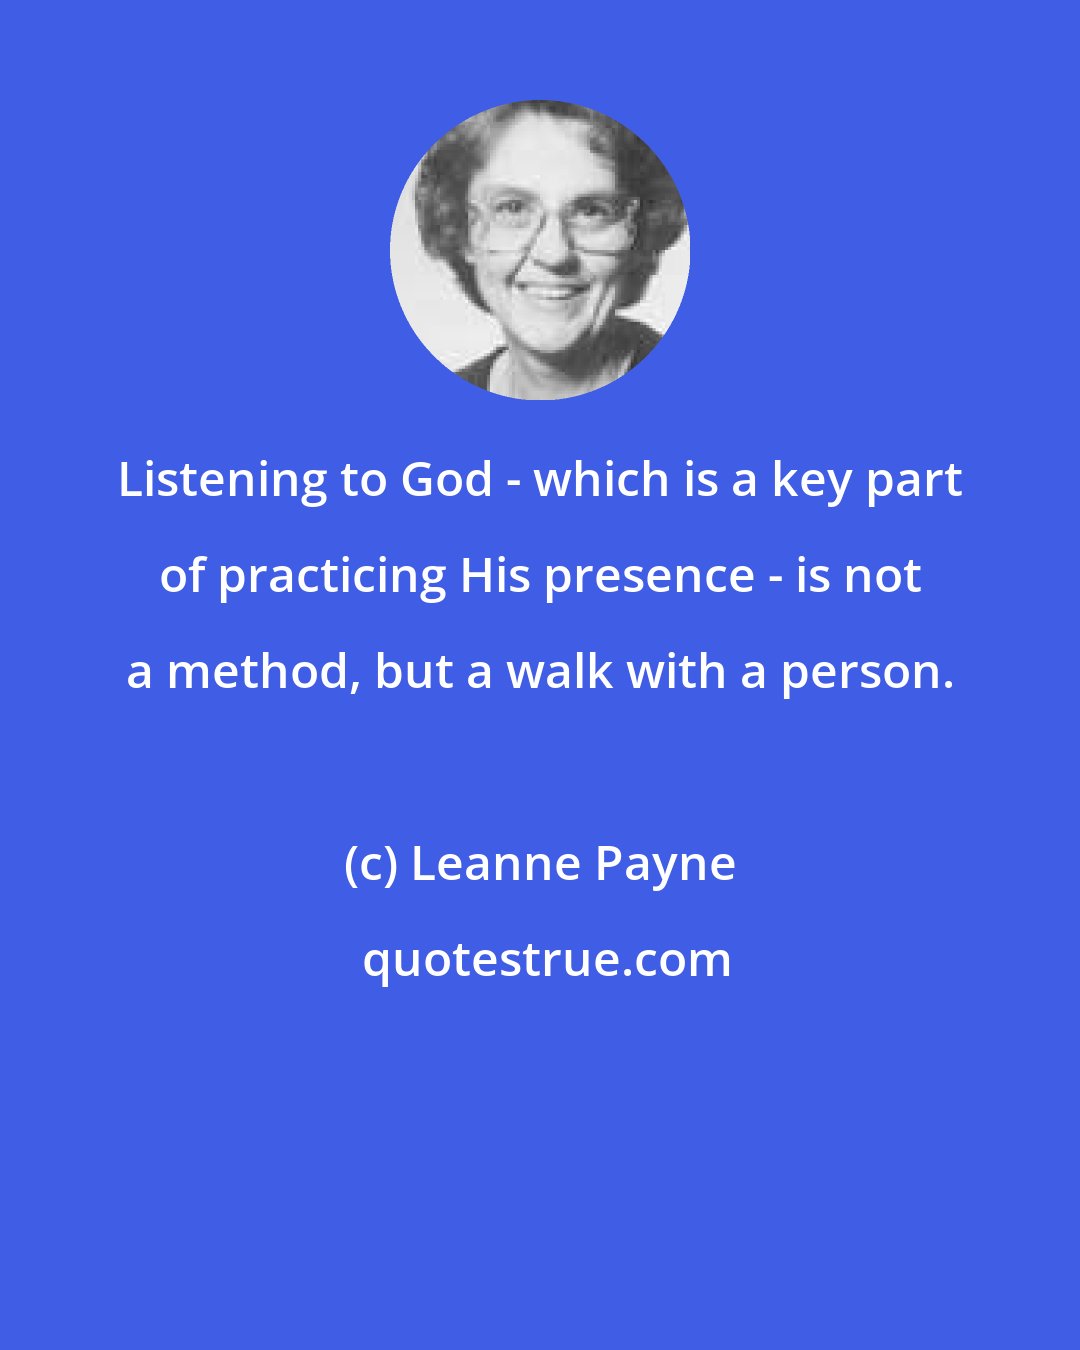 Leanne Payne: Listening to God - which is a key part of practicing His presence - is not a method, but a walk with a person.